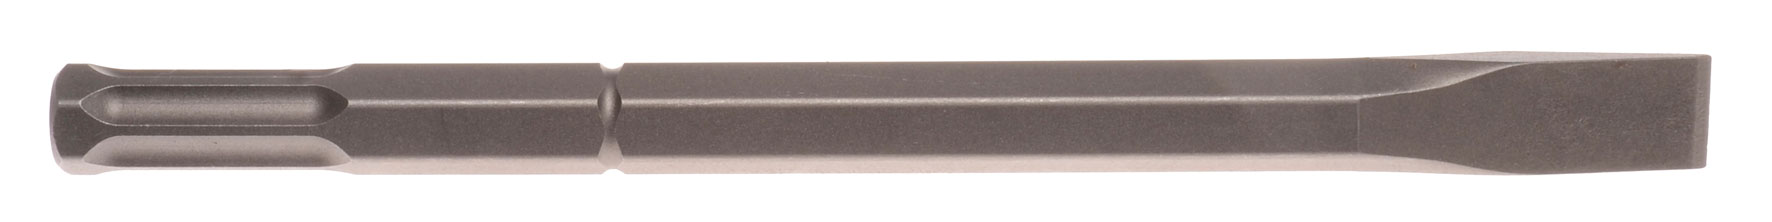 Flat chisel Shank 22 mm hex with 6 slots